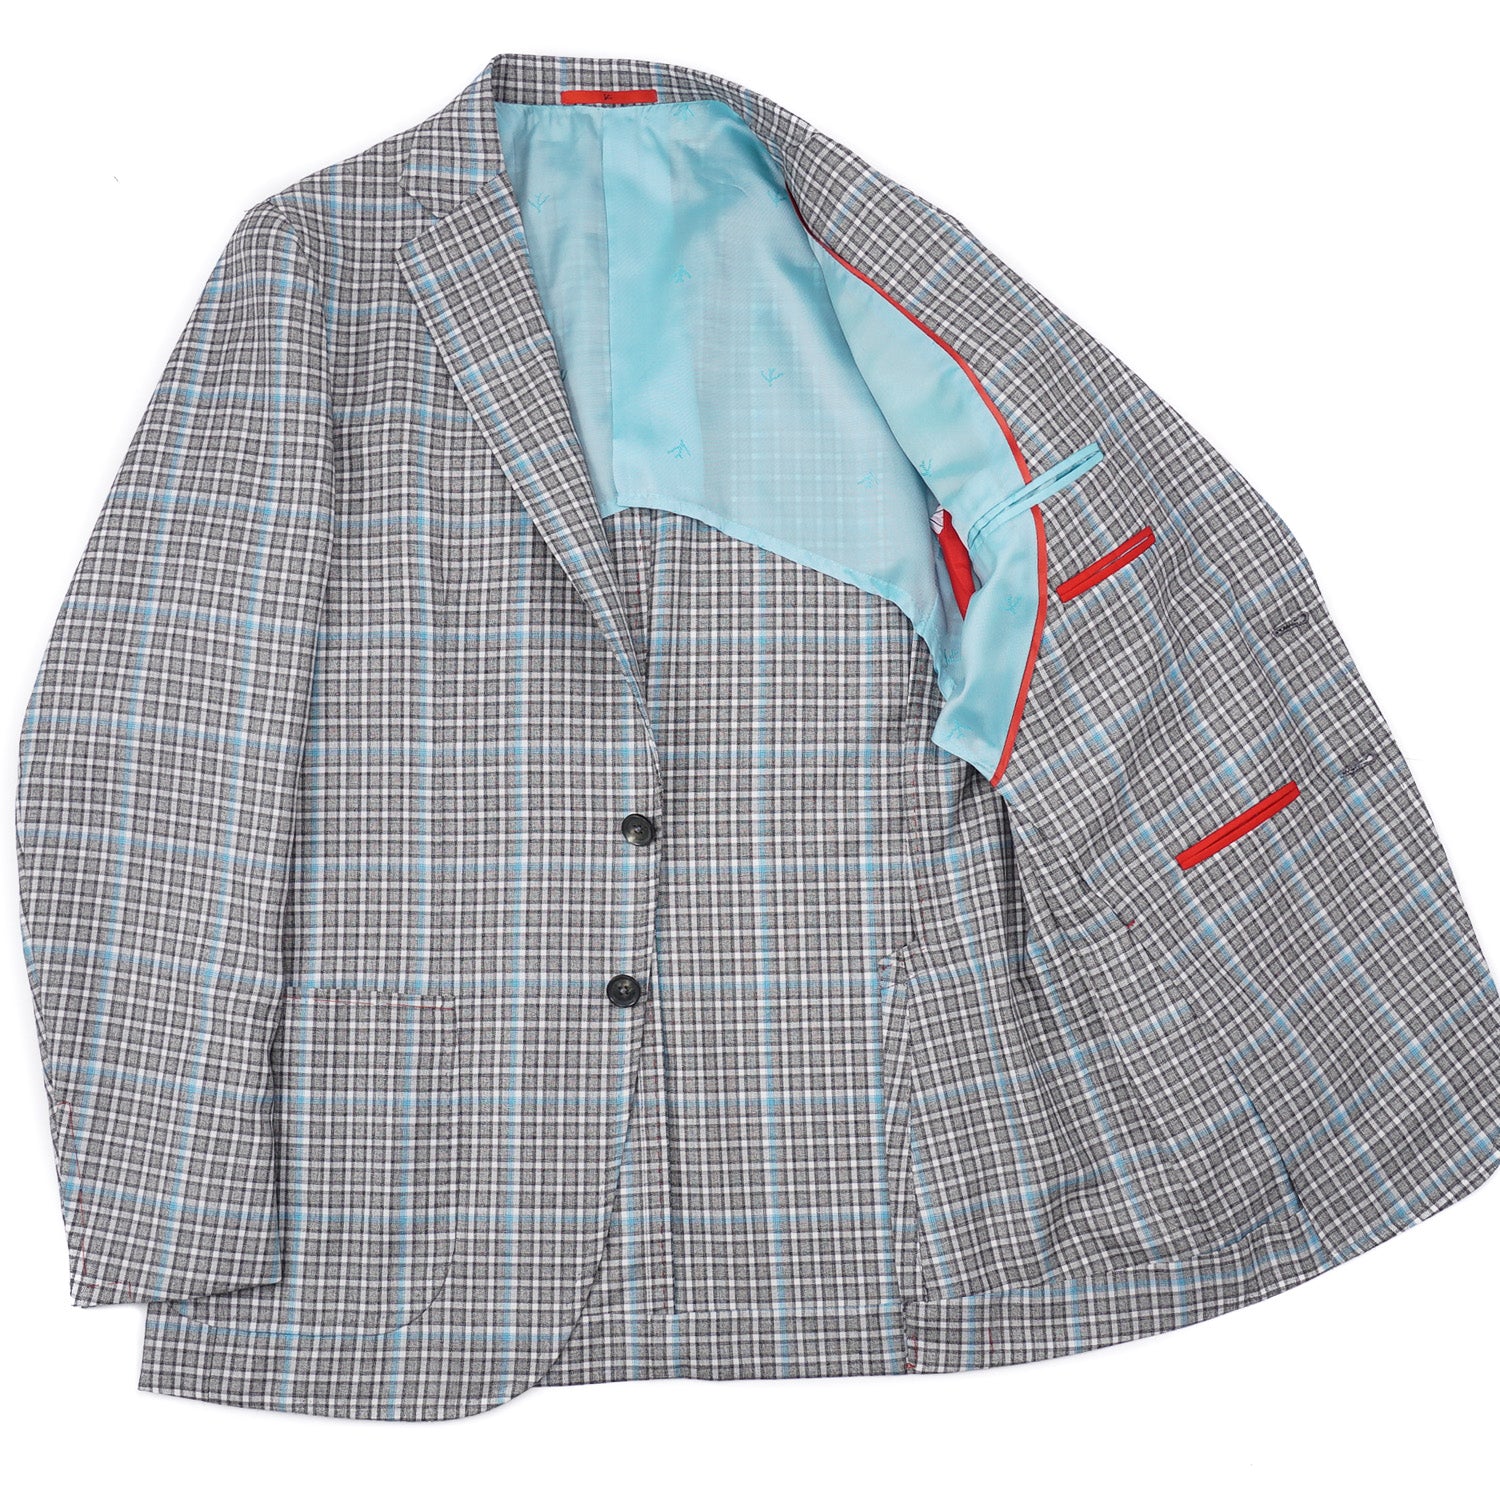 Isaia Layered Check Wool and Silk Sport Coat - Top Shelf Apparel